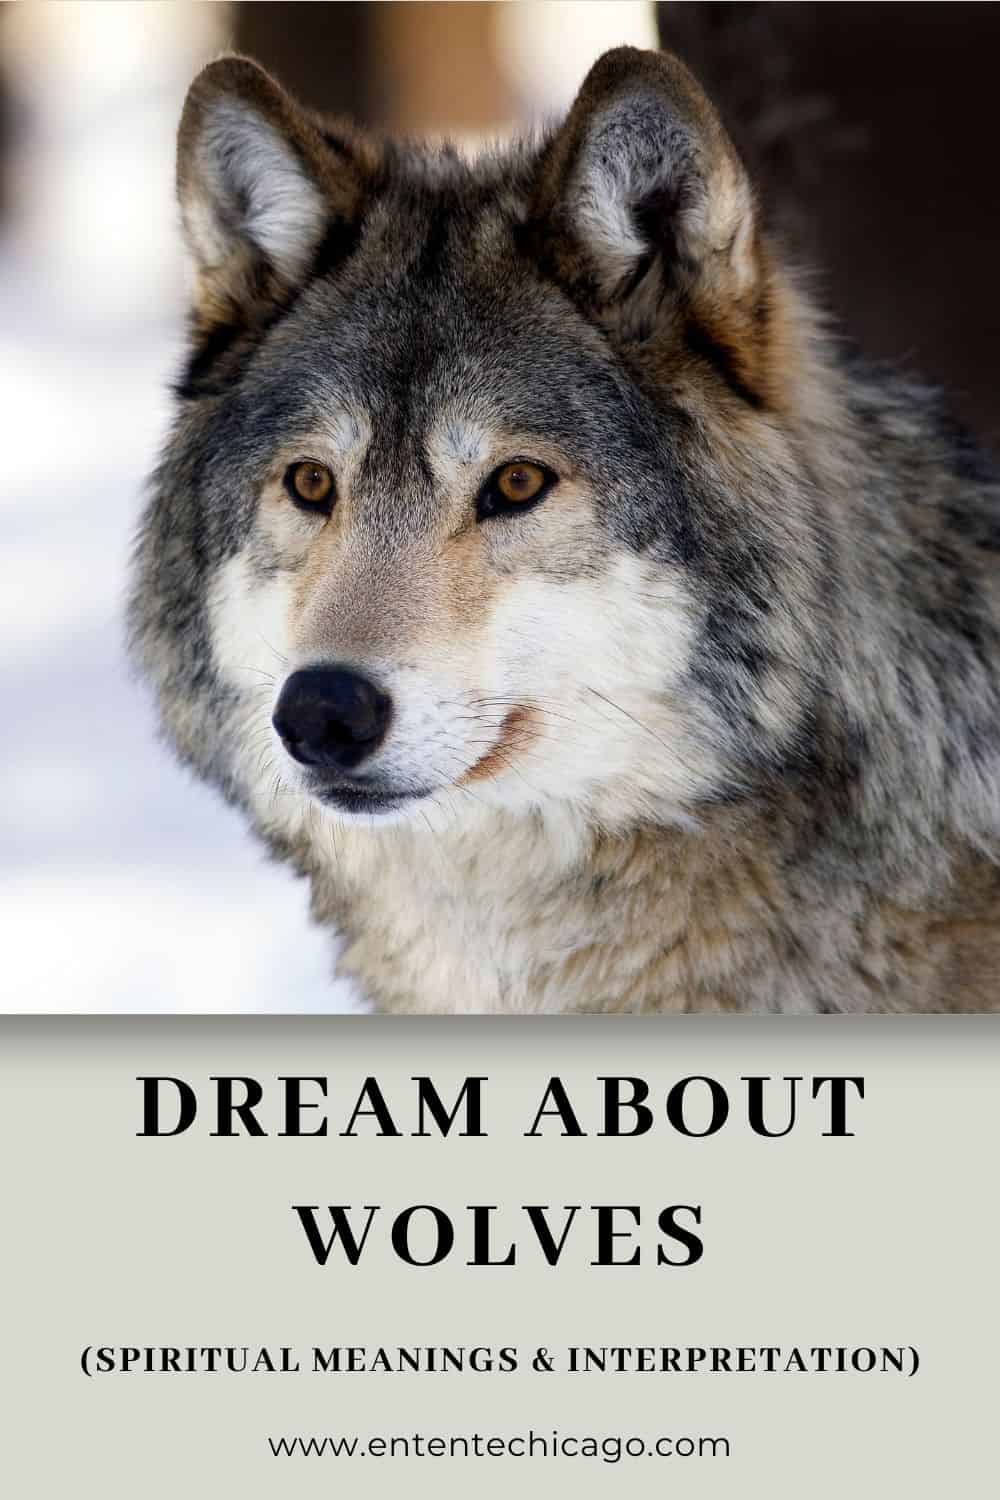 What Does it Mean When You Dream About Wolves